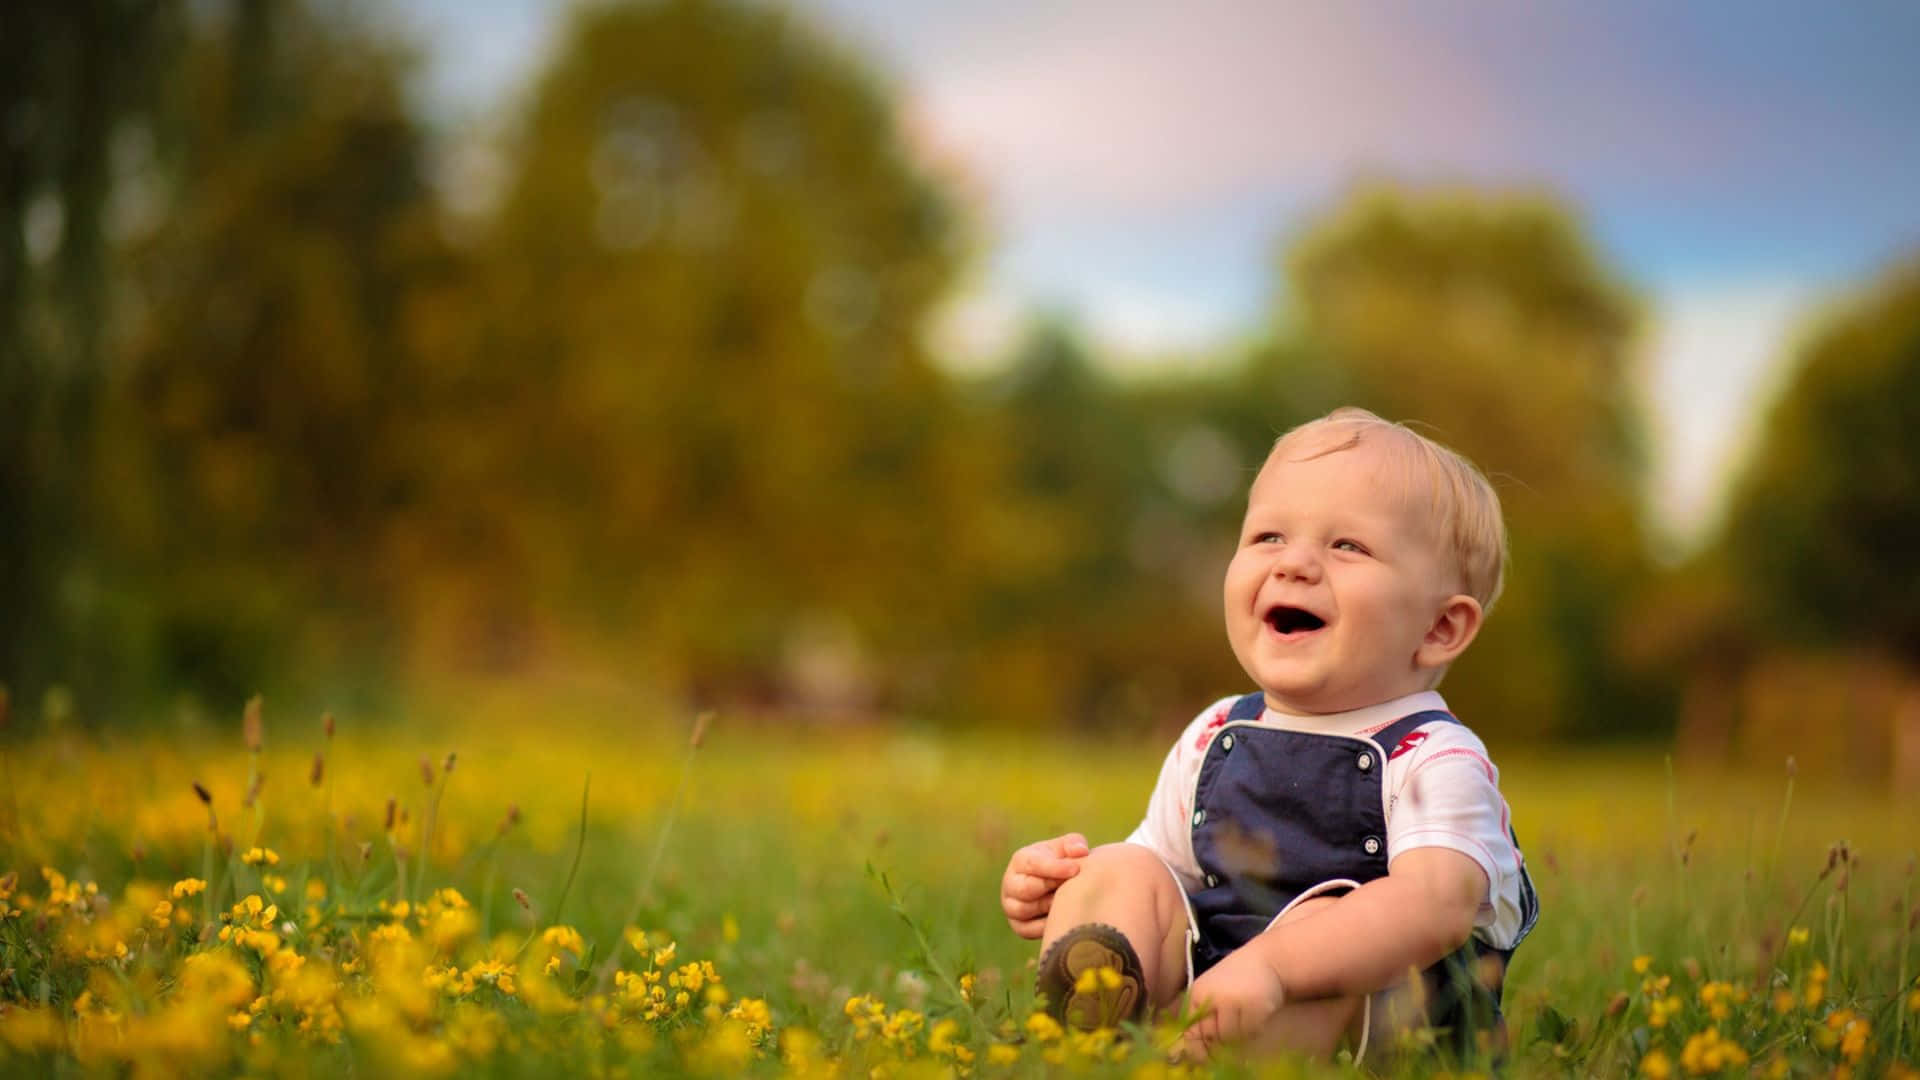 A Baby Is Sitting In A Field With Yellow Flowers